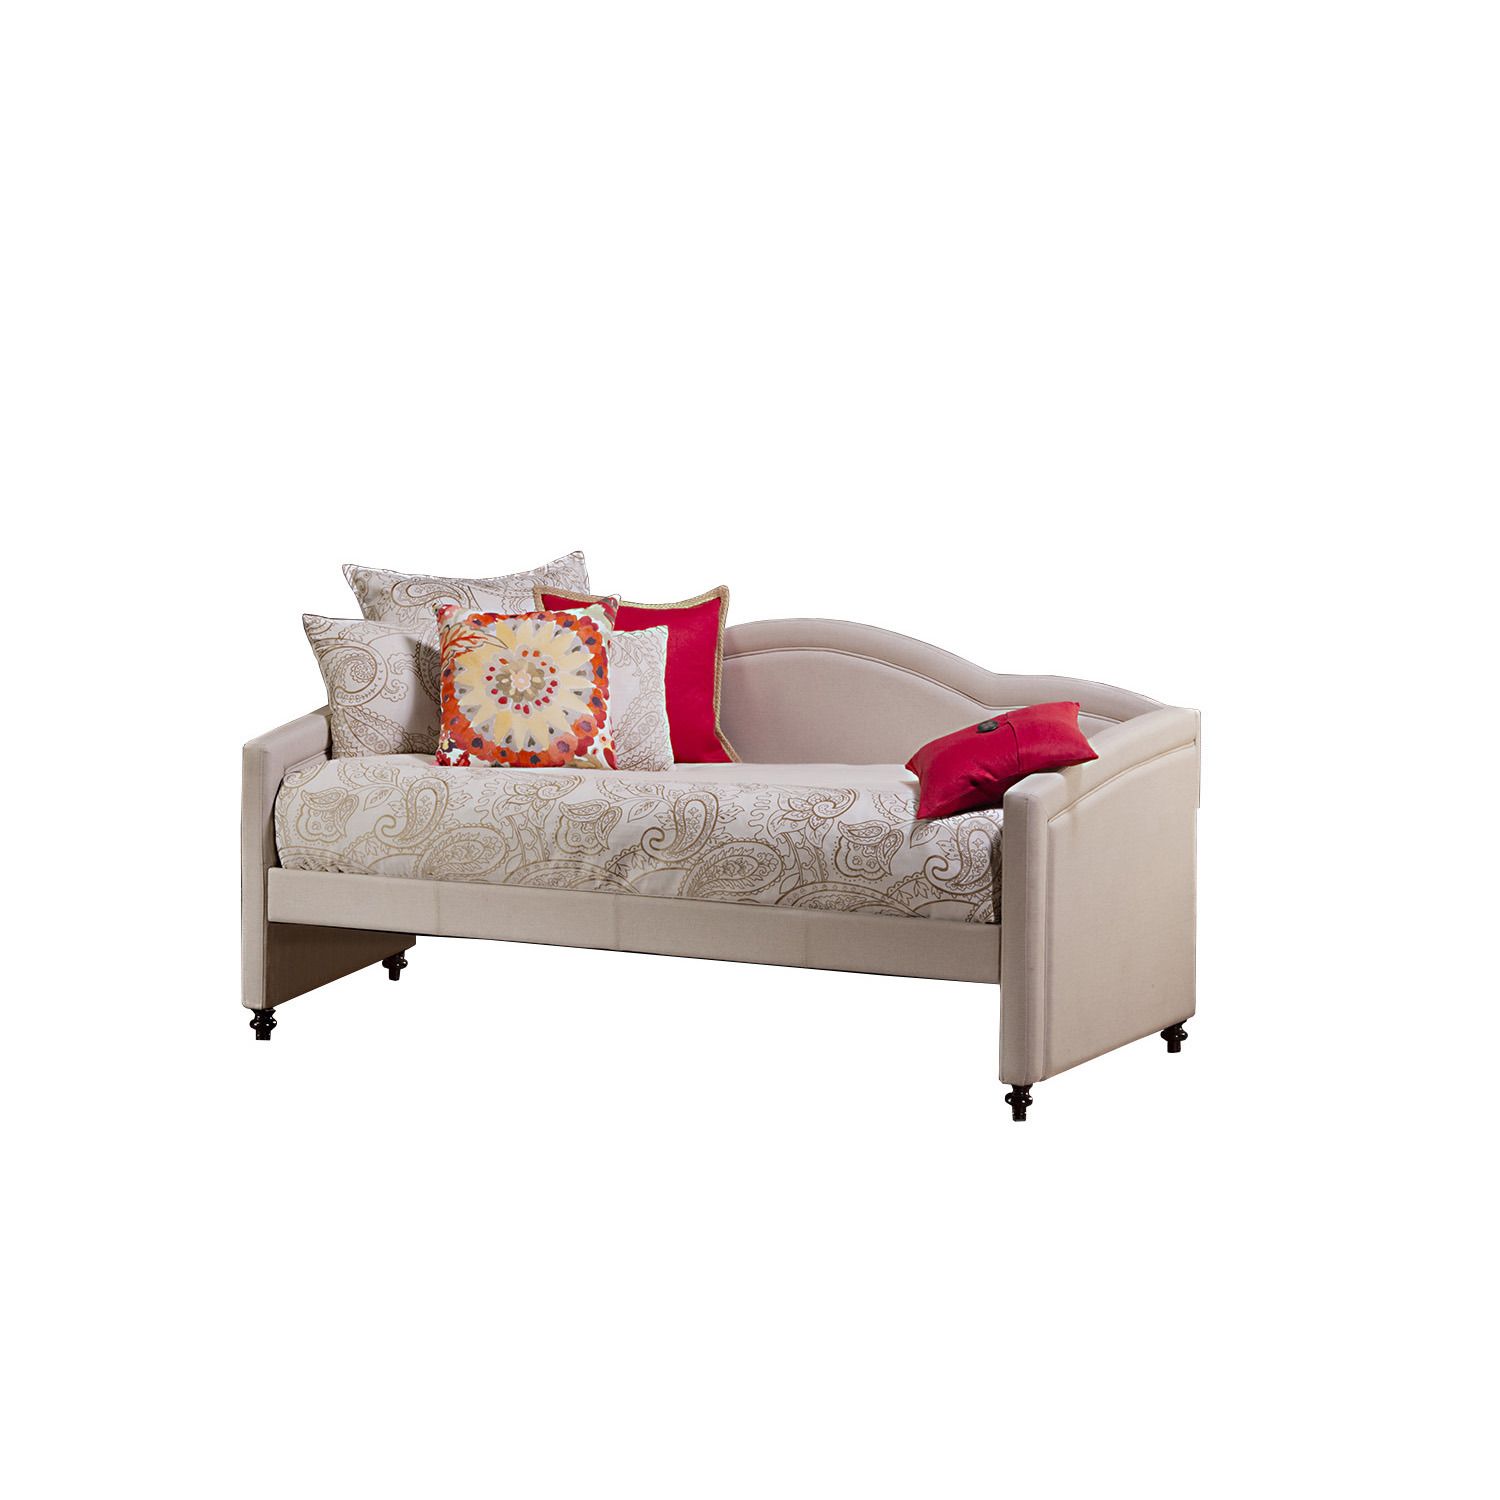 Image for Hillsdale Furniture Jasmine Daybed at Kohl's.